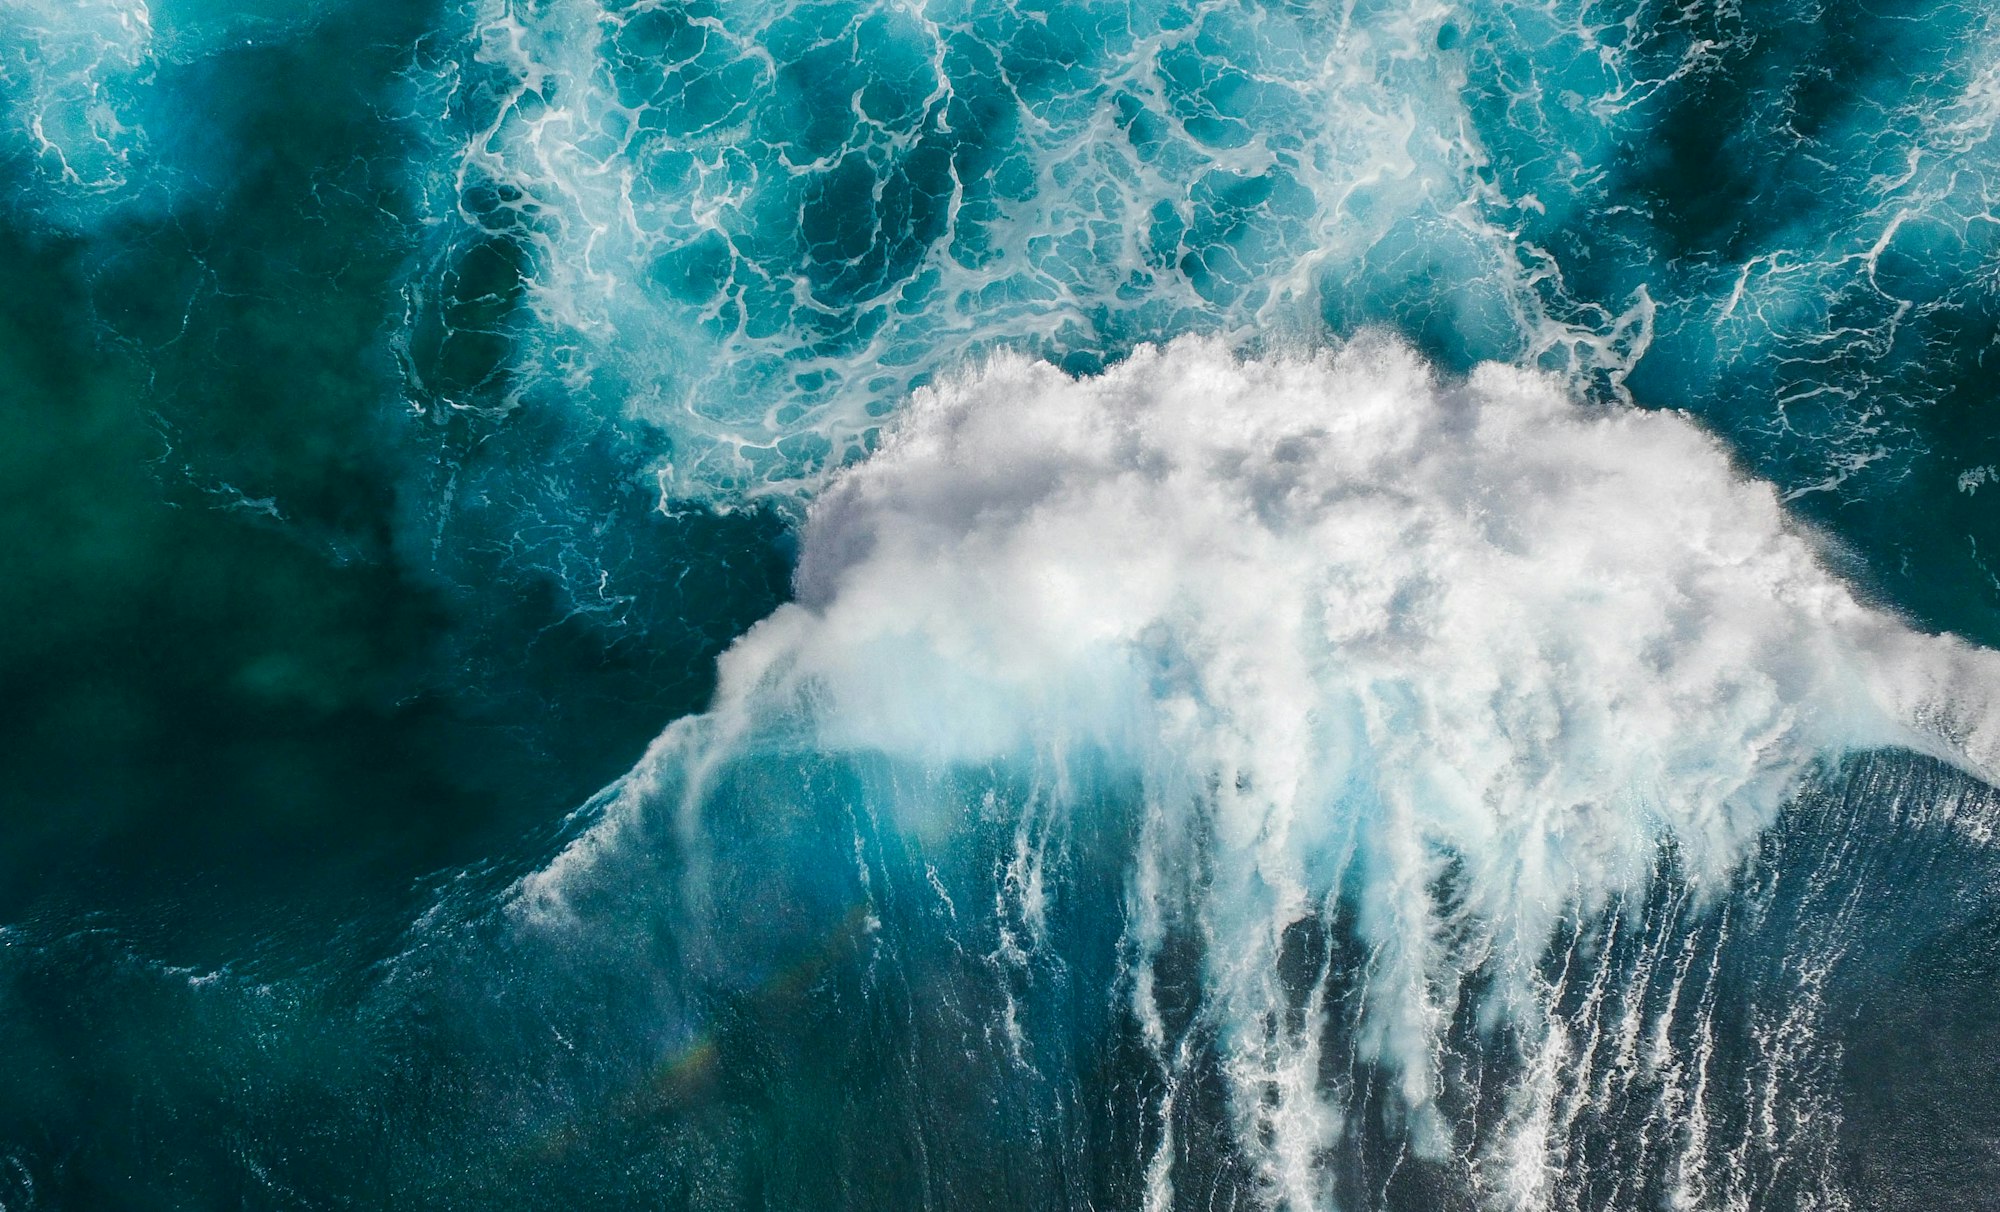 Ride the Waves of Change: How to Embrace Life's Ups and Downs